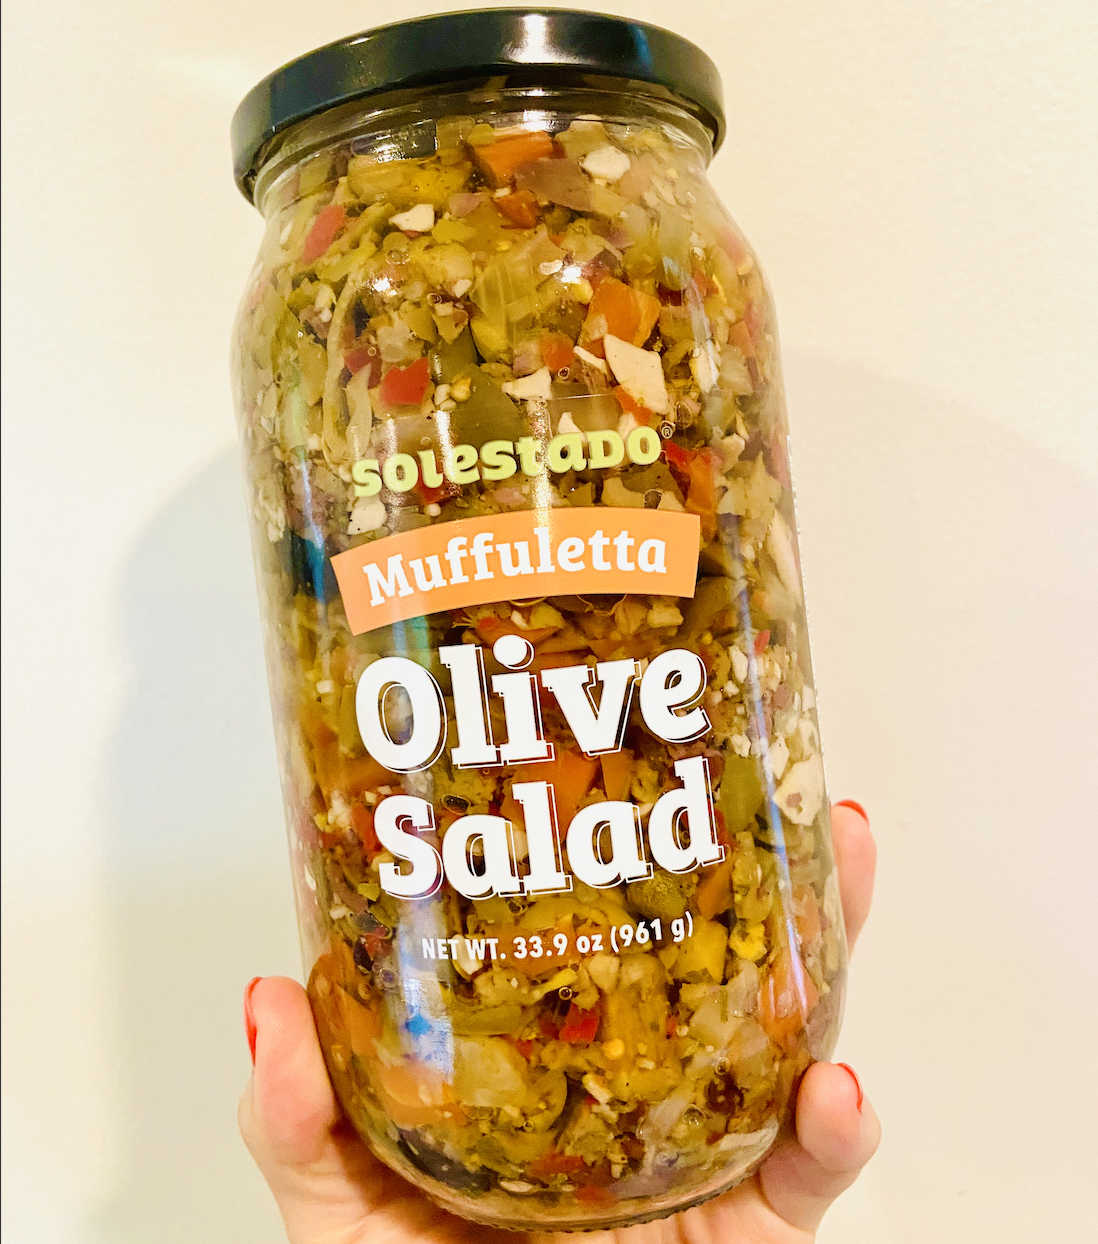 A hand holding a jar of olive salad, which is brown and red